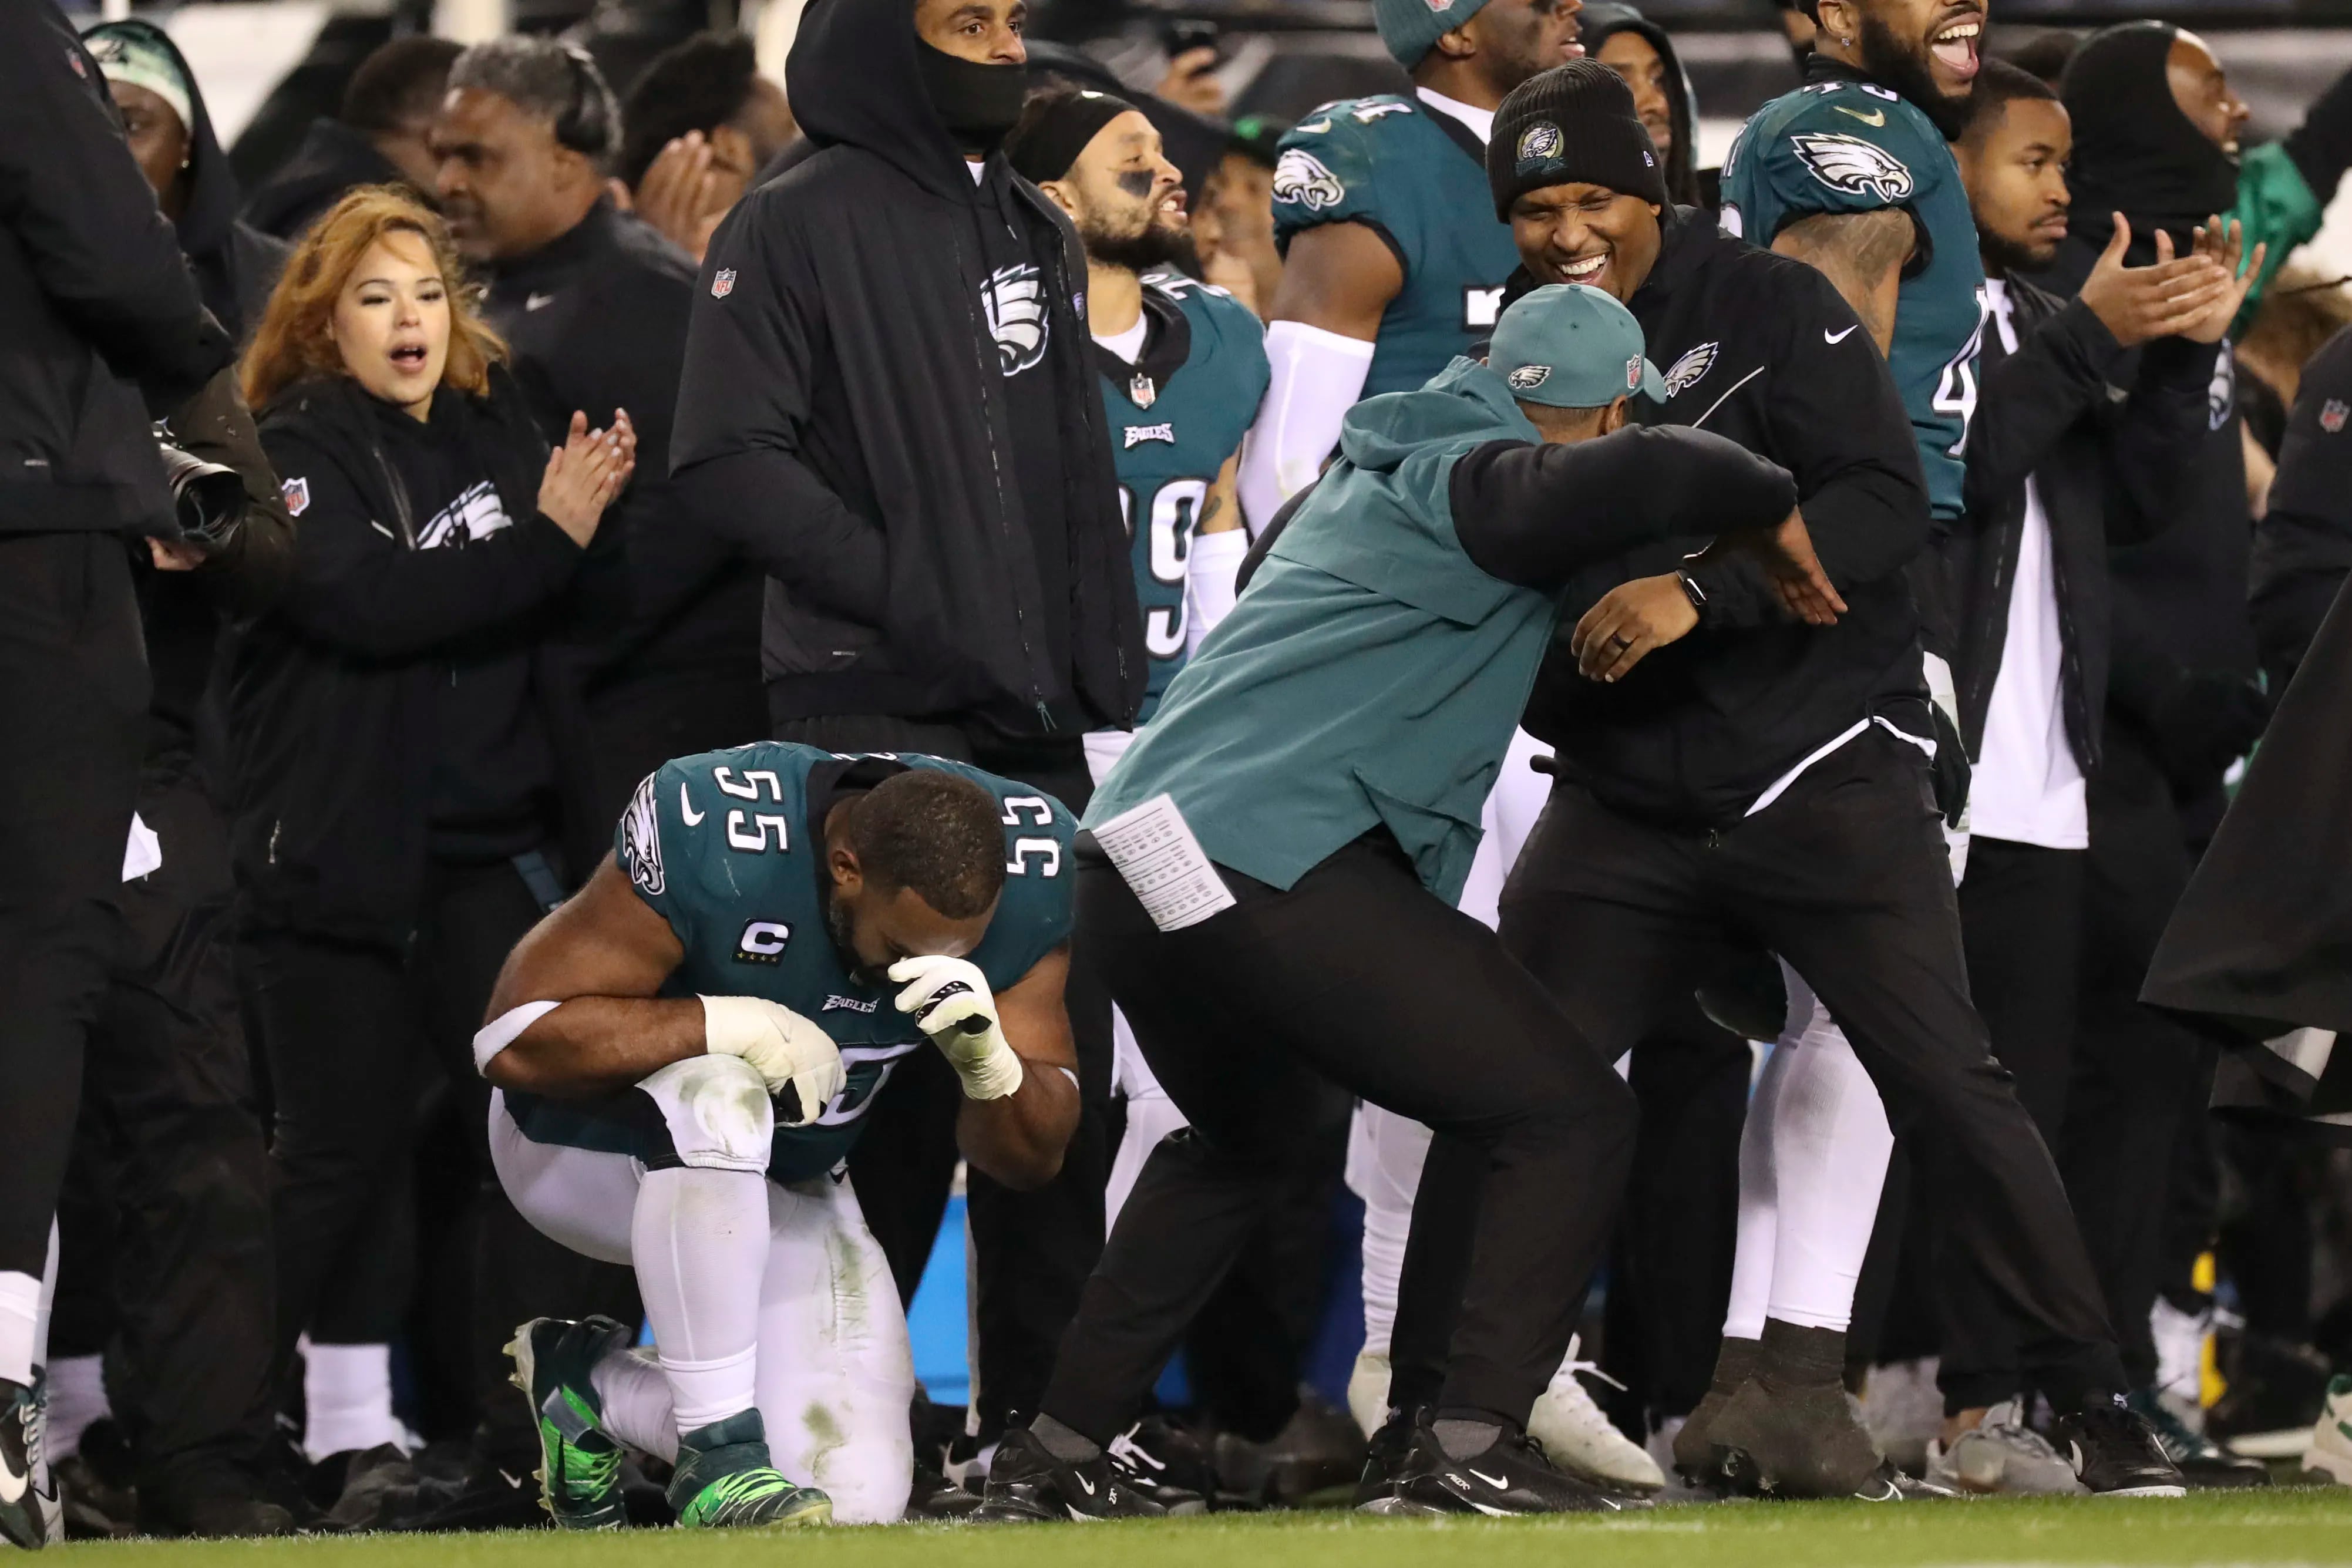 Photos of the Eagles' 31-7 win over the 49ers in the NFC championship